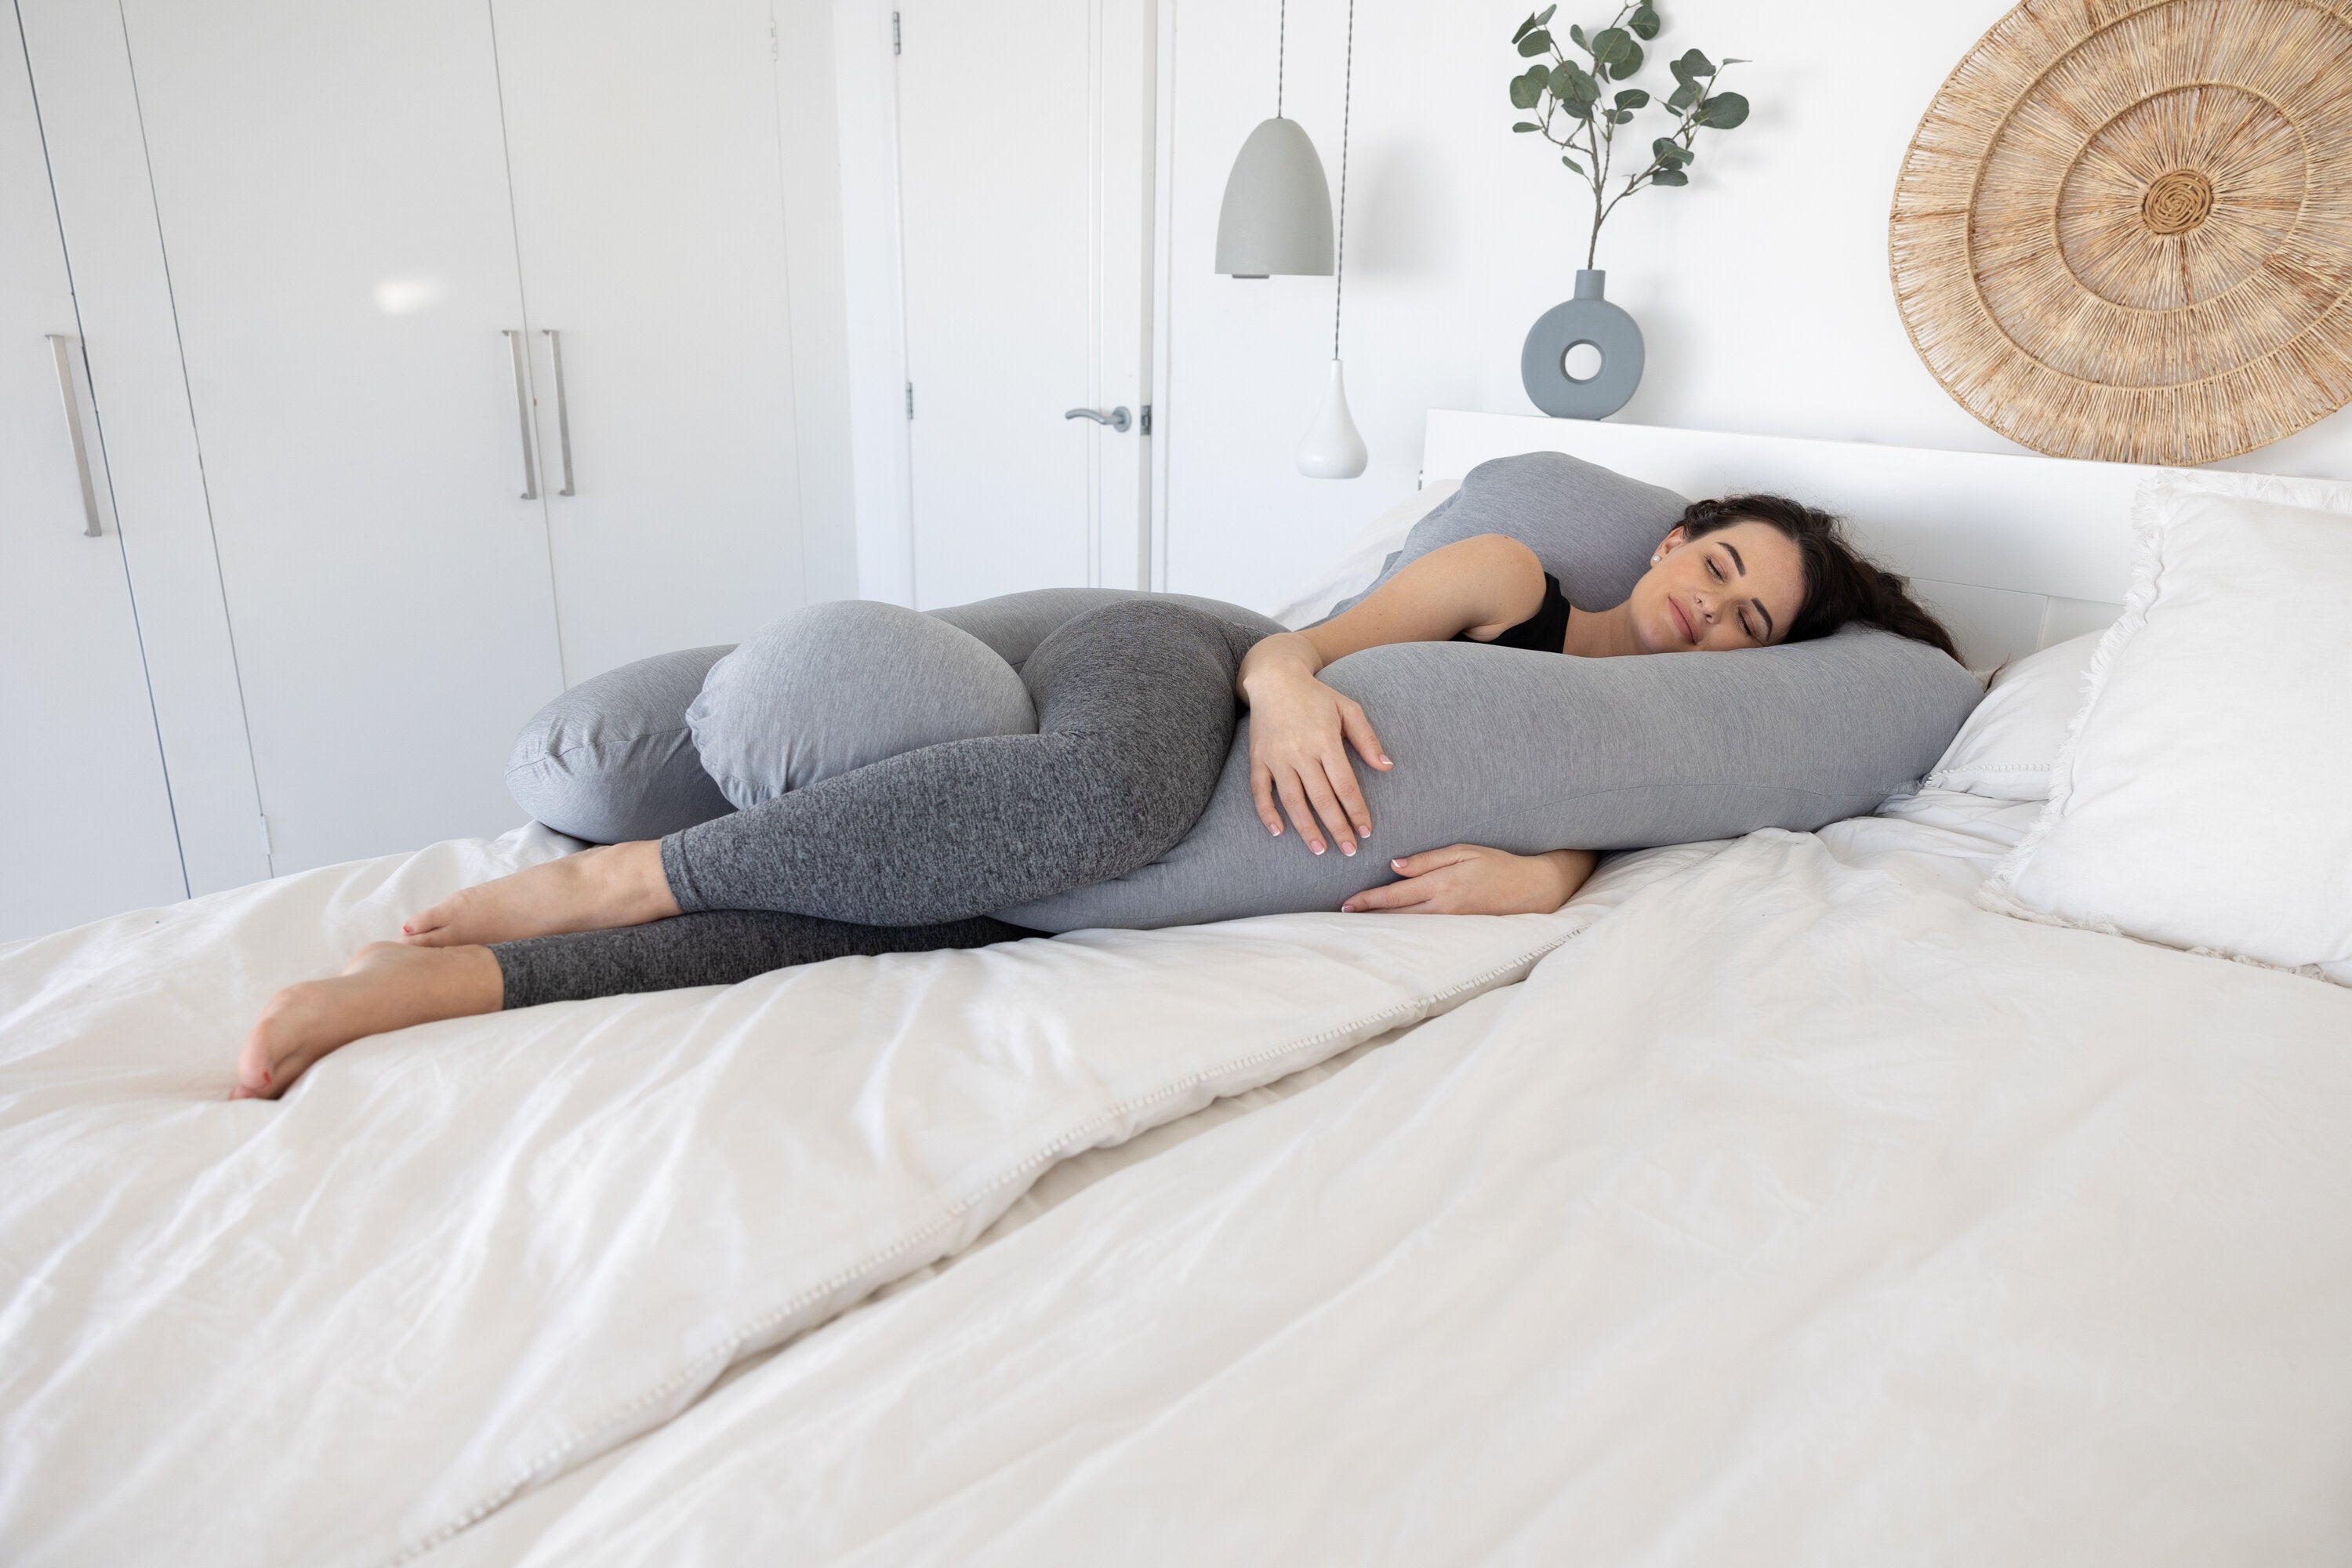 Can't Sleep While Pregnant?  The Best Pregnancy Pillow for Side Sleep